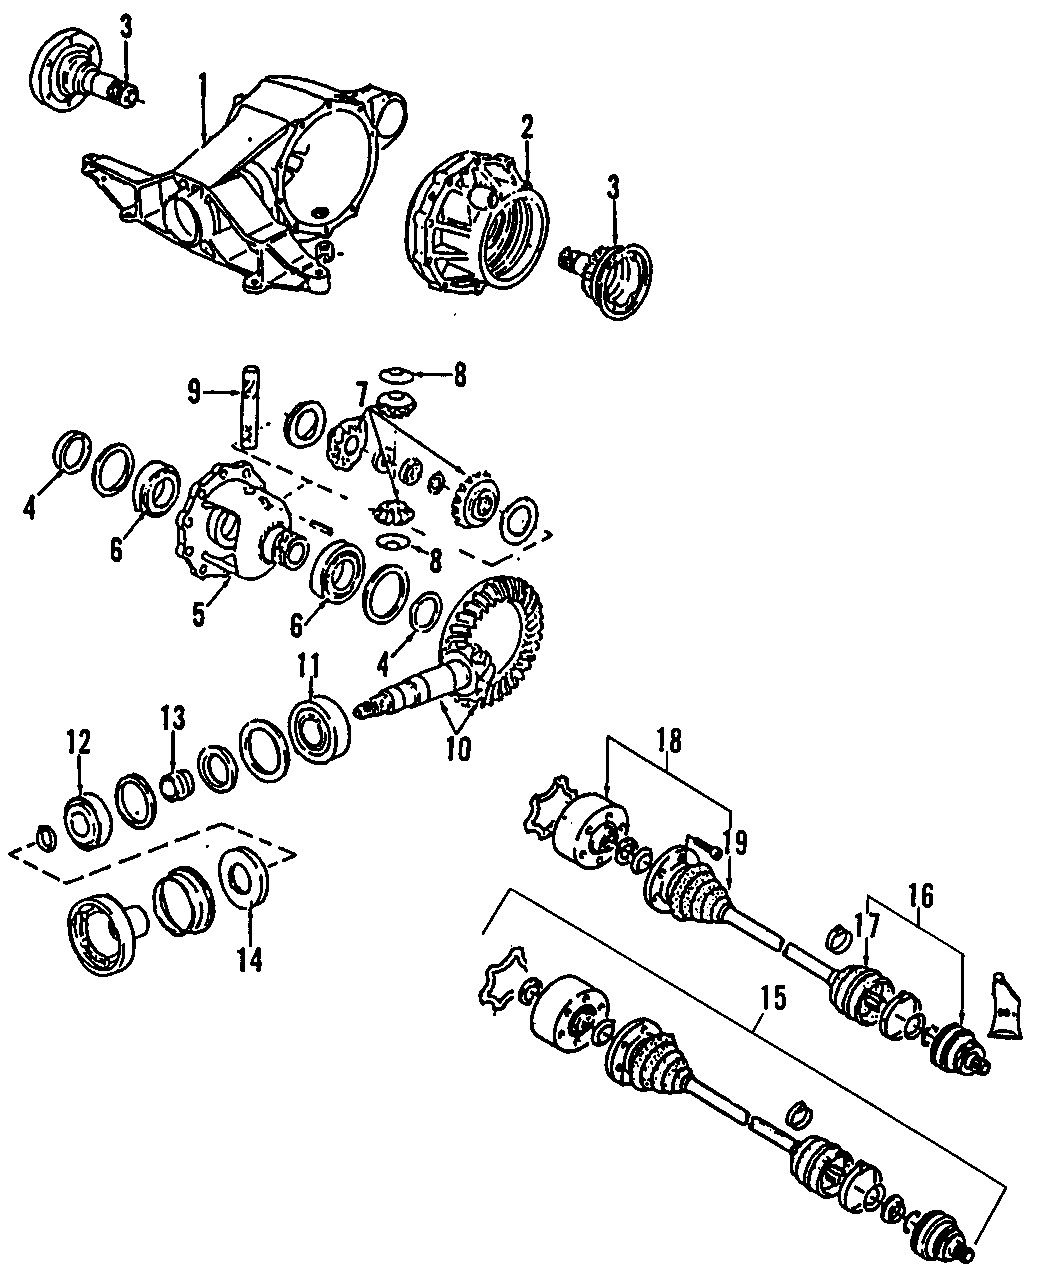 17DRIVE AXLES. REAR AXLE. AXLE SHAFTS & JOINTS. DIFFERENTIAL. PROPELLER SHAFT.https://images.simplepart.com/images/parts/motor/fullsize/F205080.png